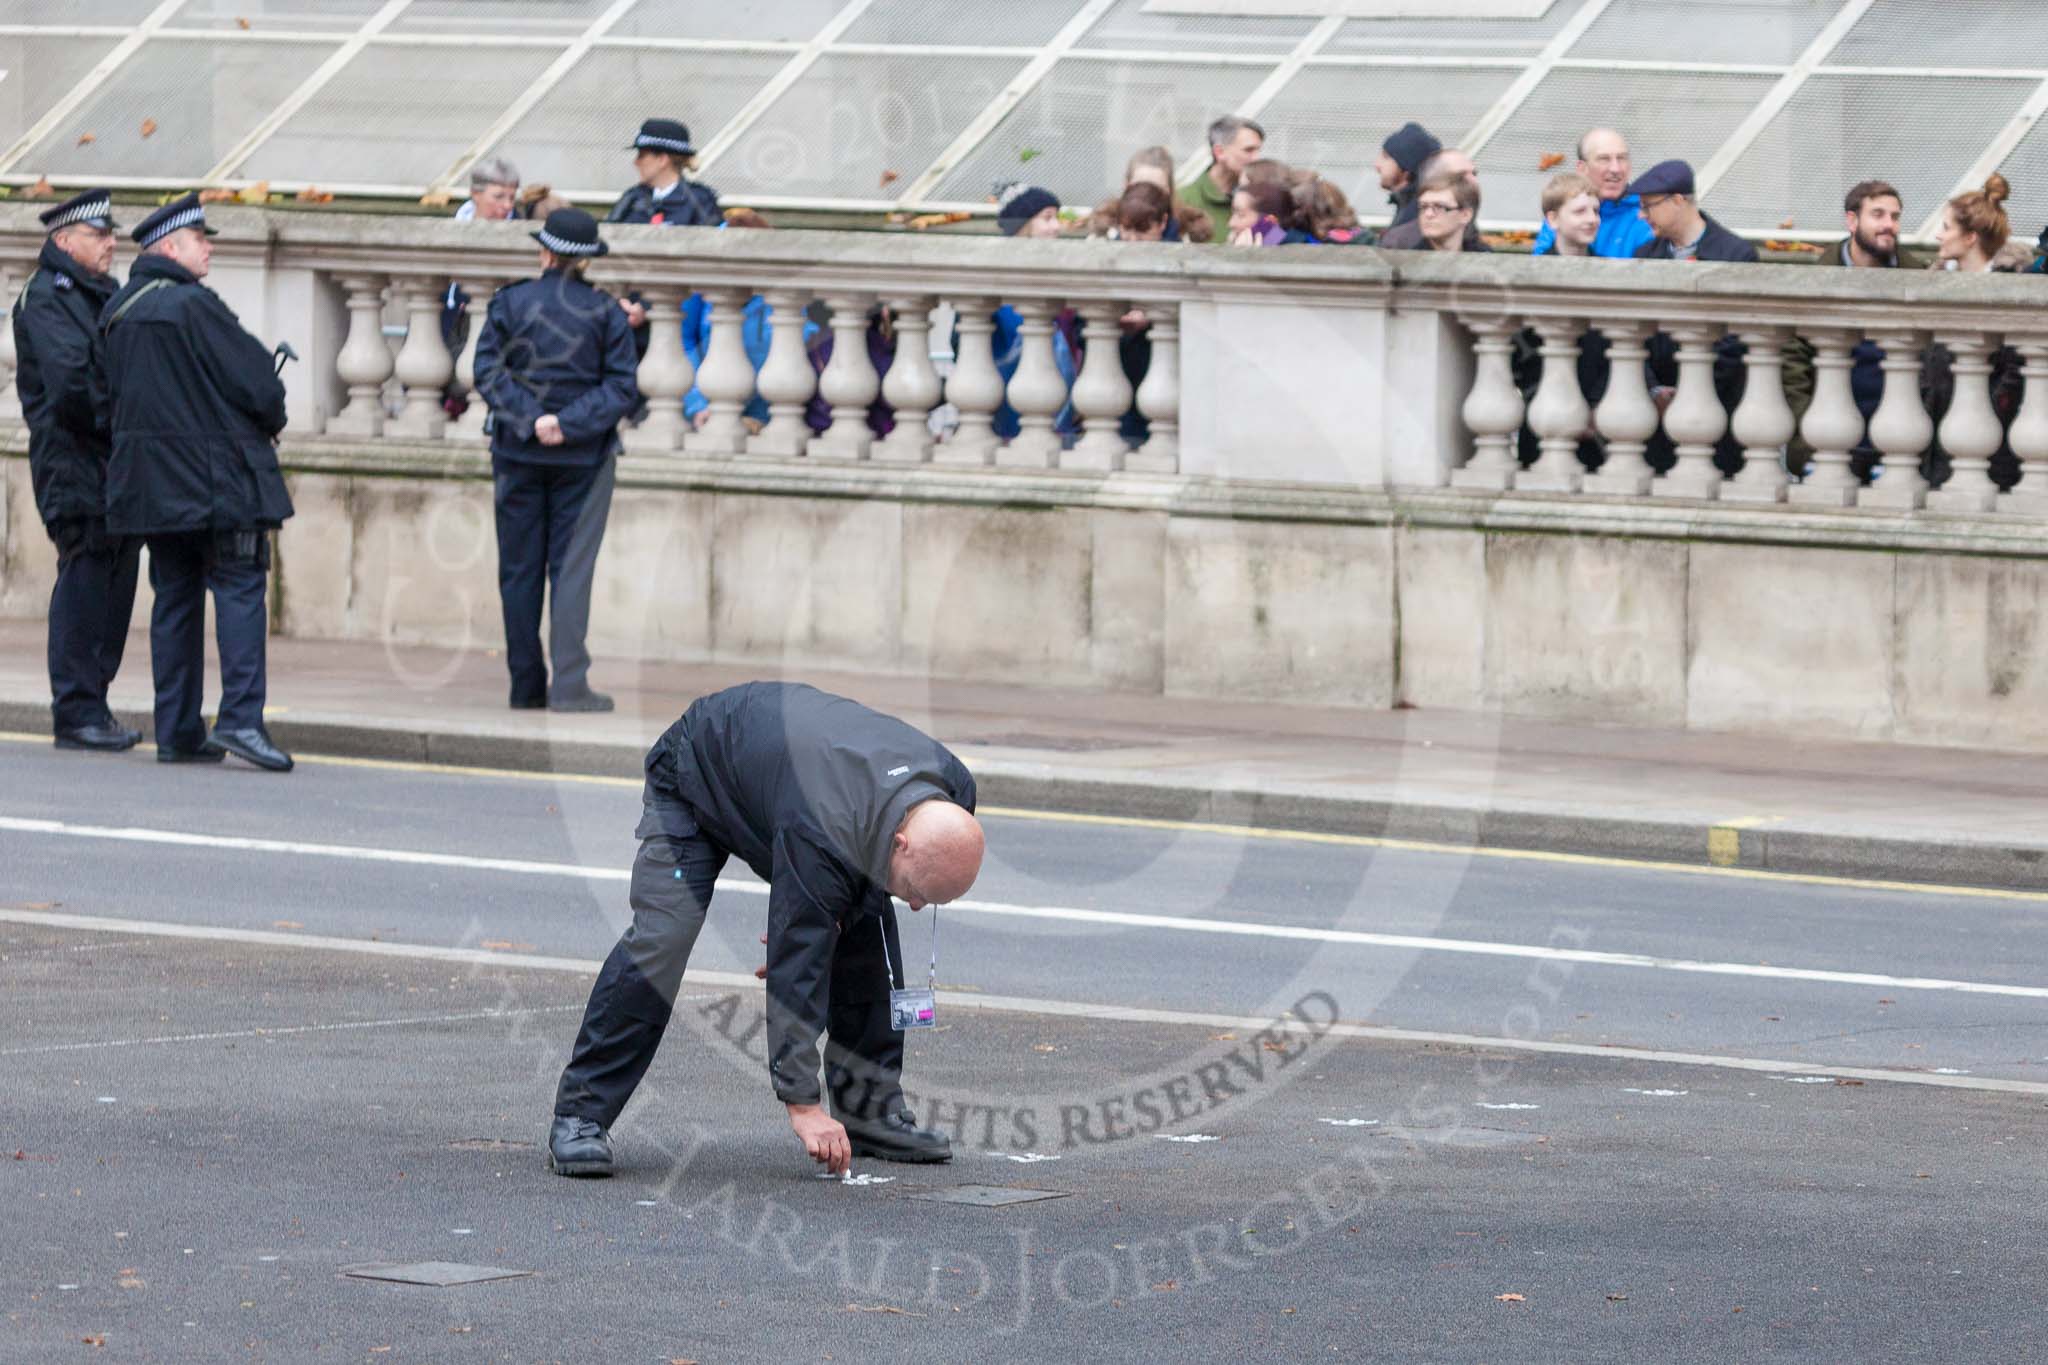 Remembrance Sunday at the Cenotaph 2015: The positions for the High Commissioners around the Cenotaph are chalked on the pavement. Image #5, 08 November 2015 08:54 Whitehall, London, UK